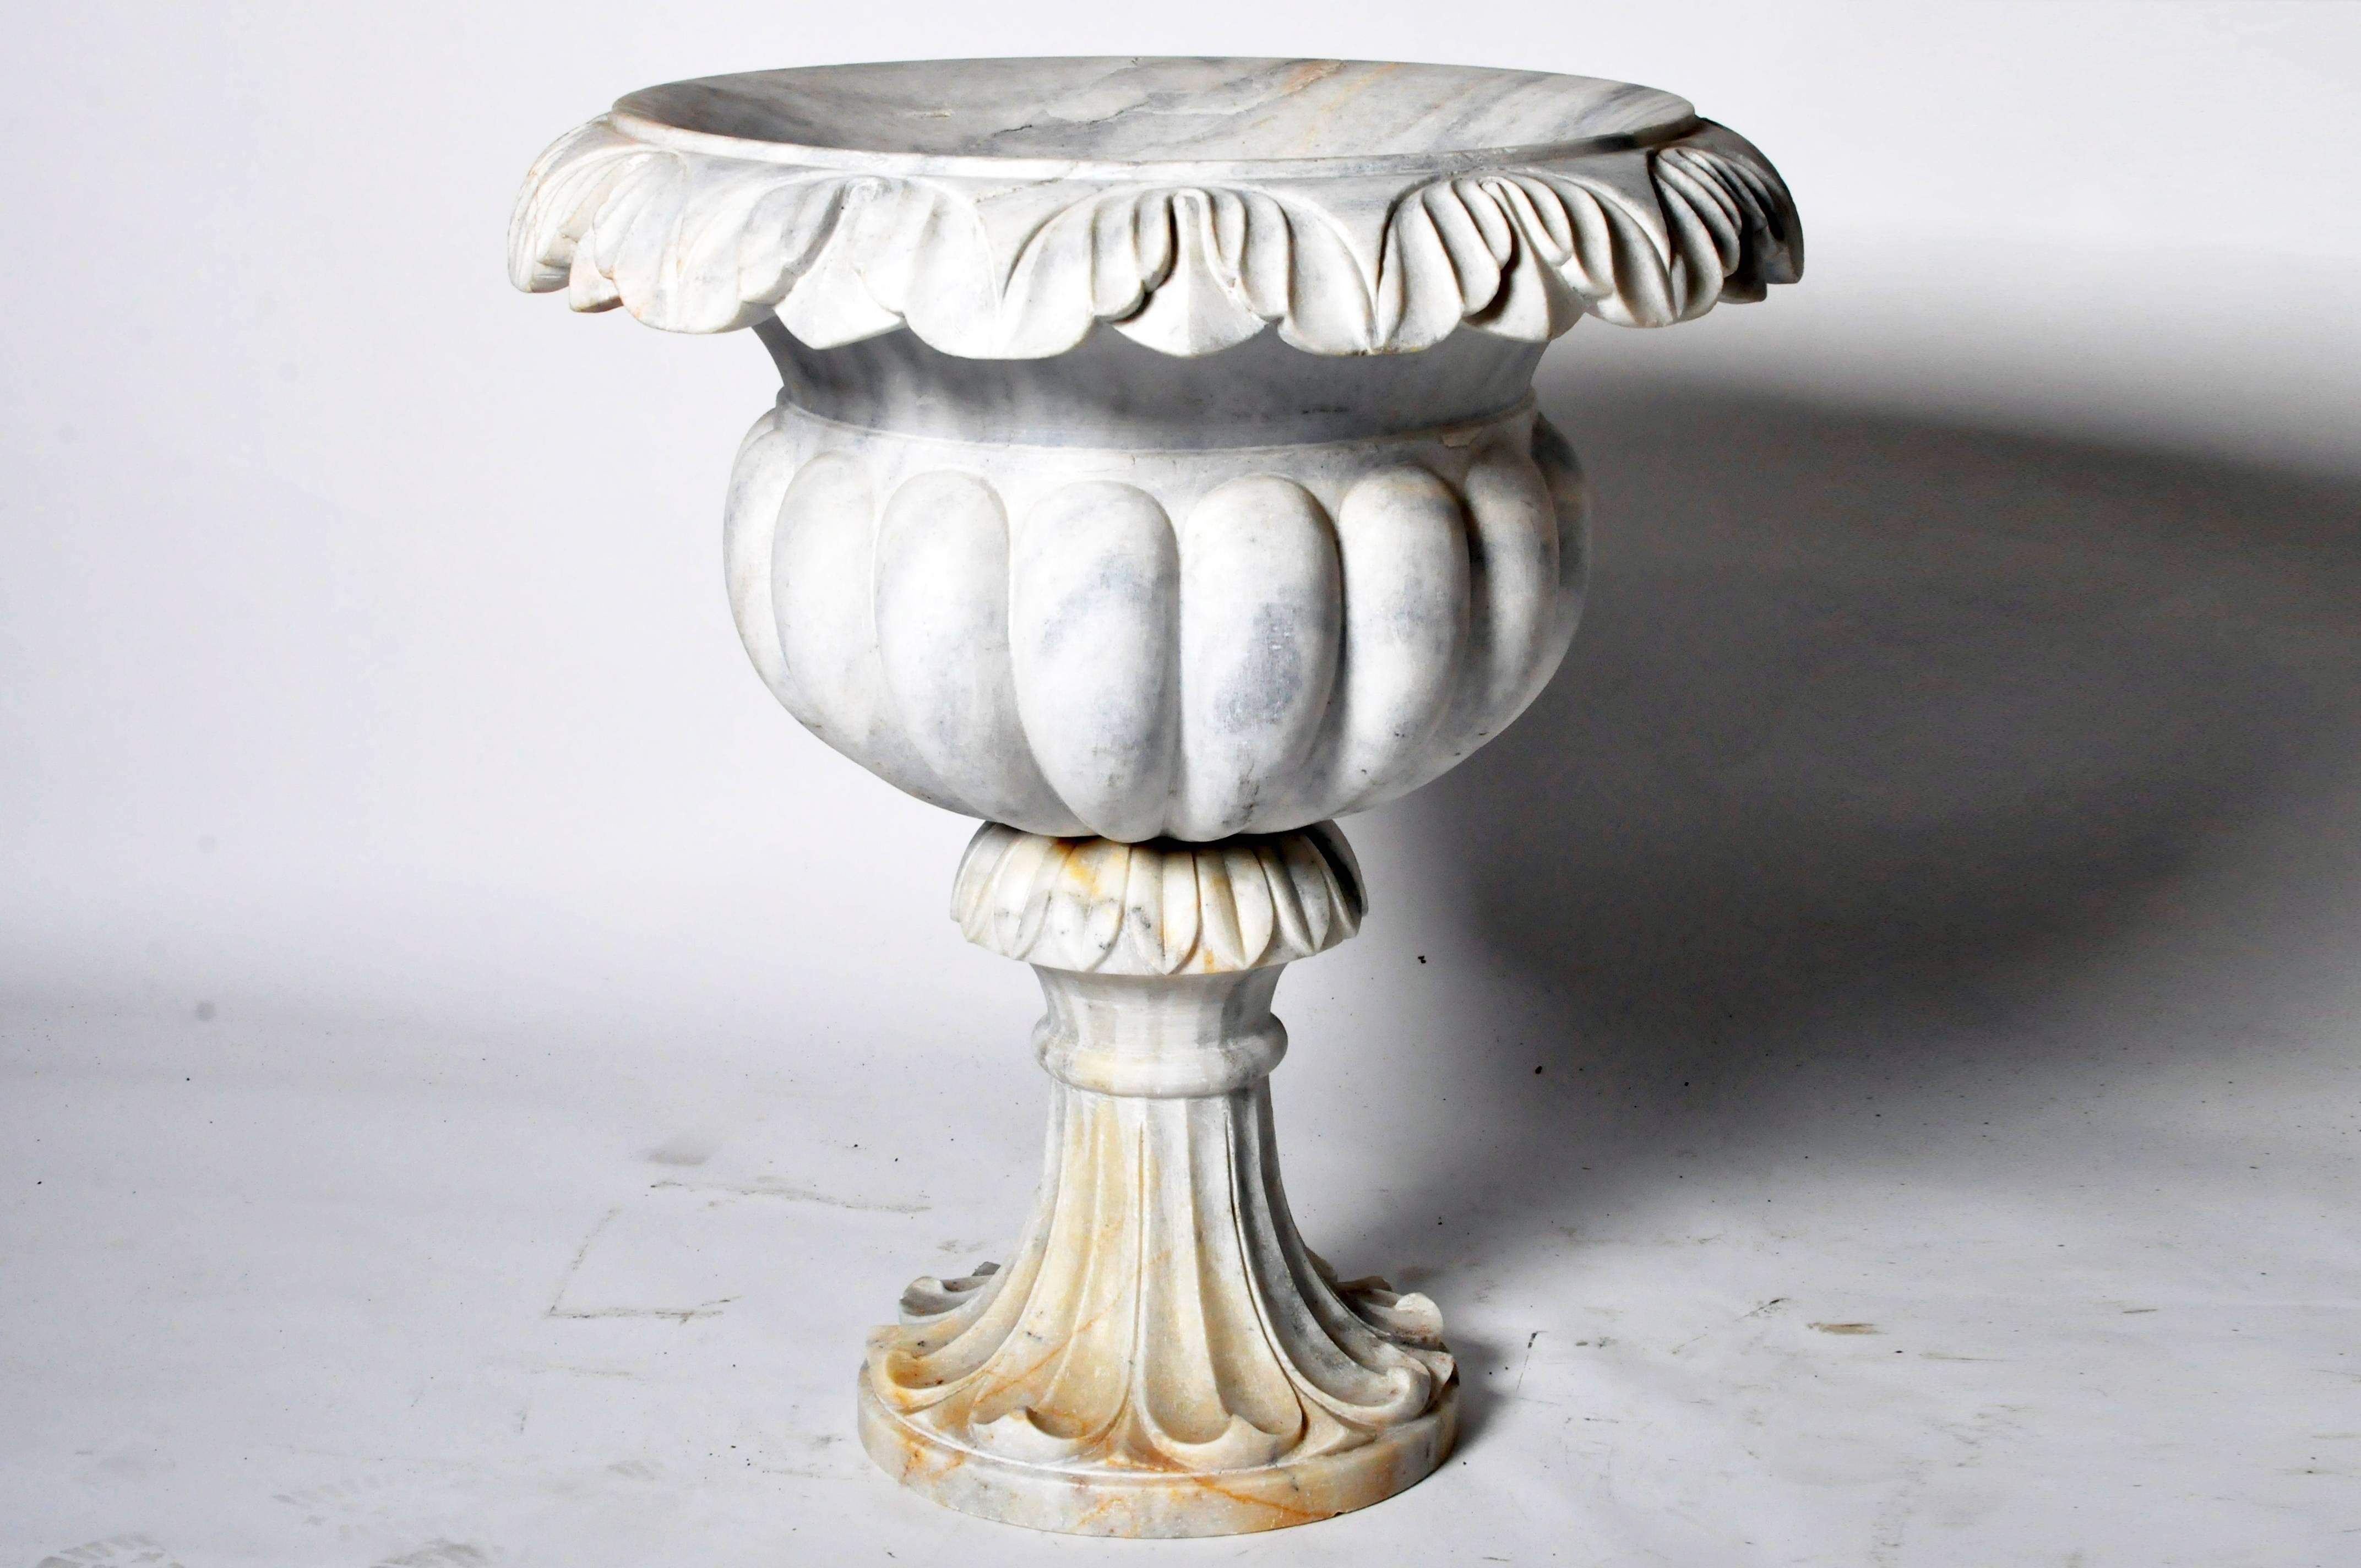 The variegated marble perfectly compliments these shapely urns. They are beautifully carved from the ruffled foliate rims, down through the ribbed bodies supported by frond patterned pedestal bases.